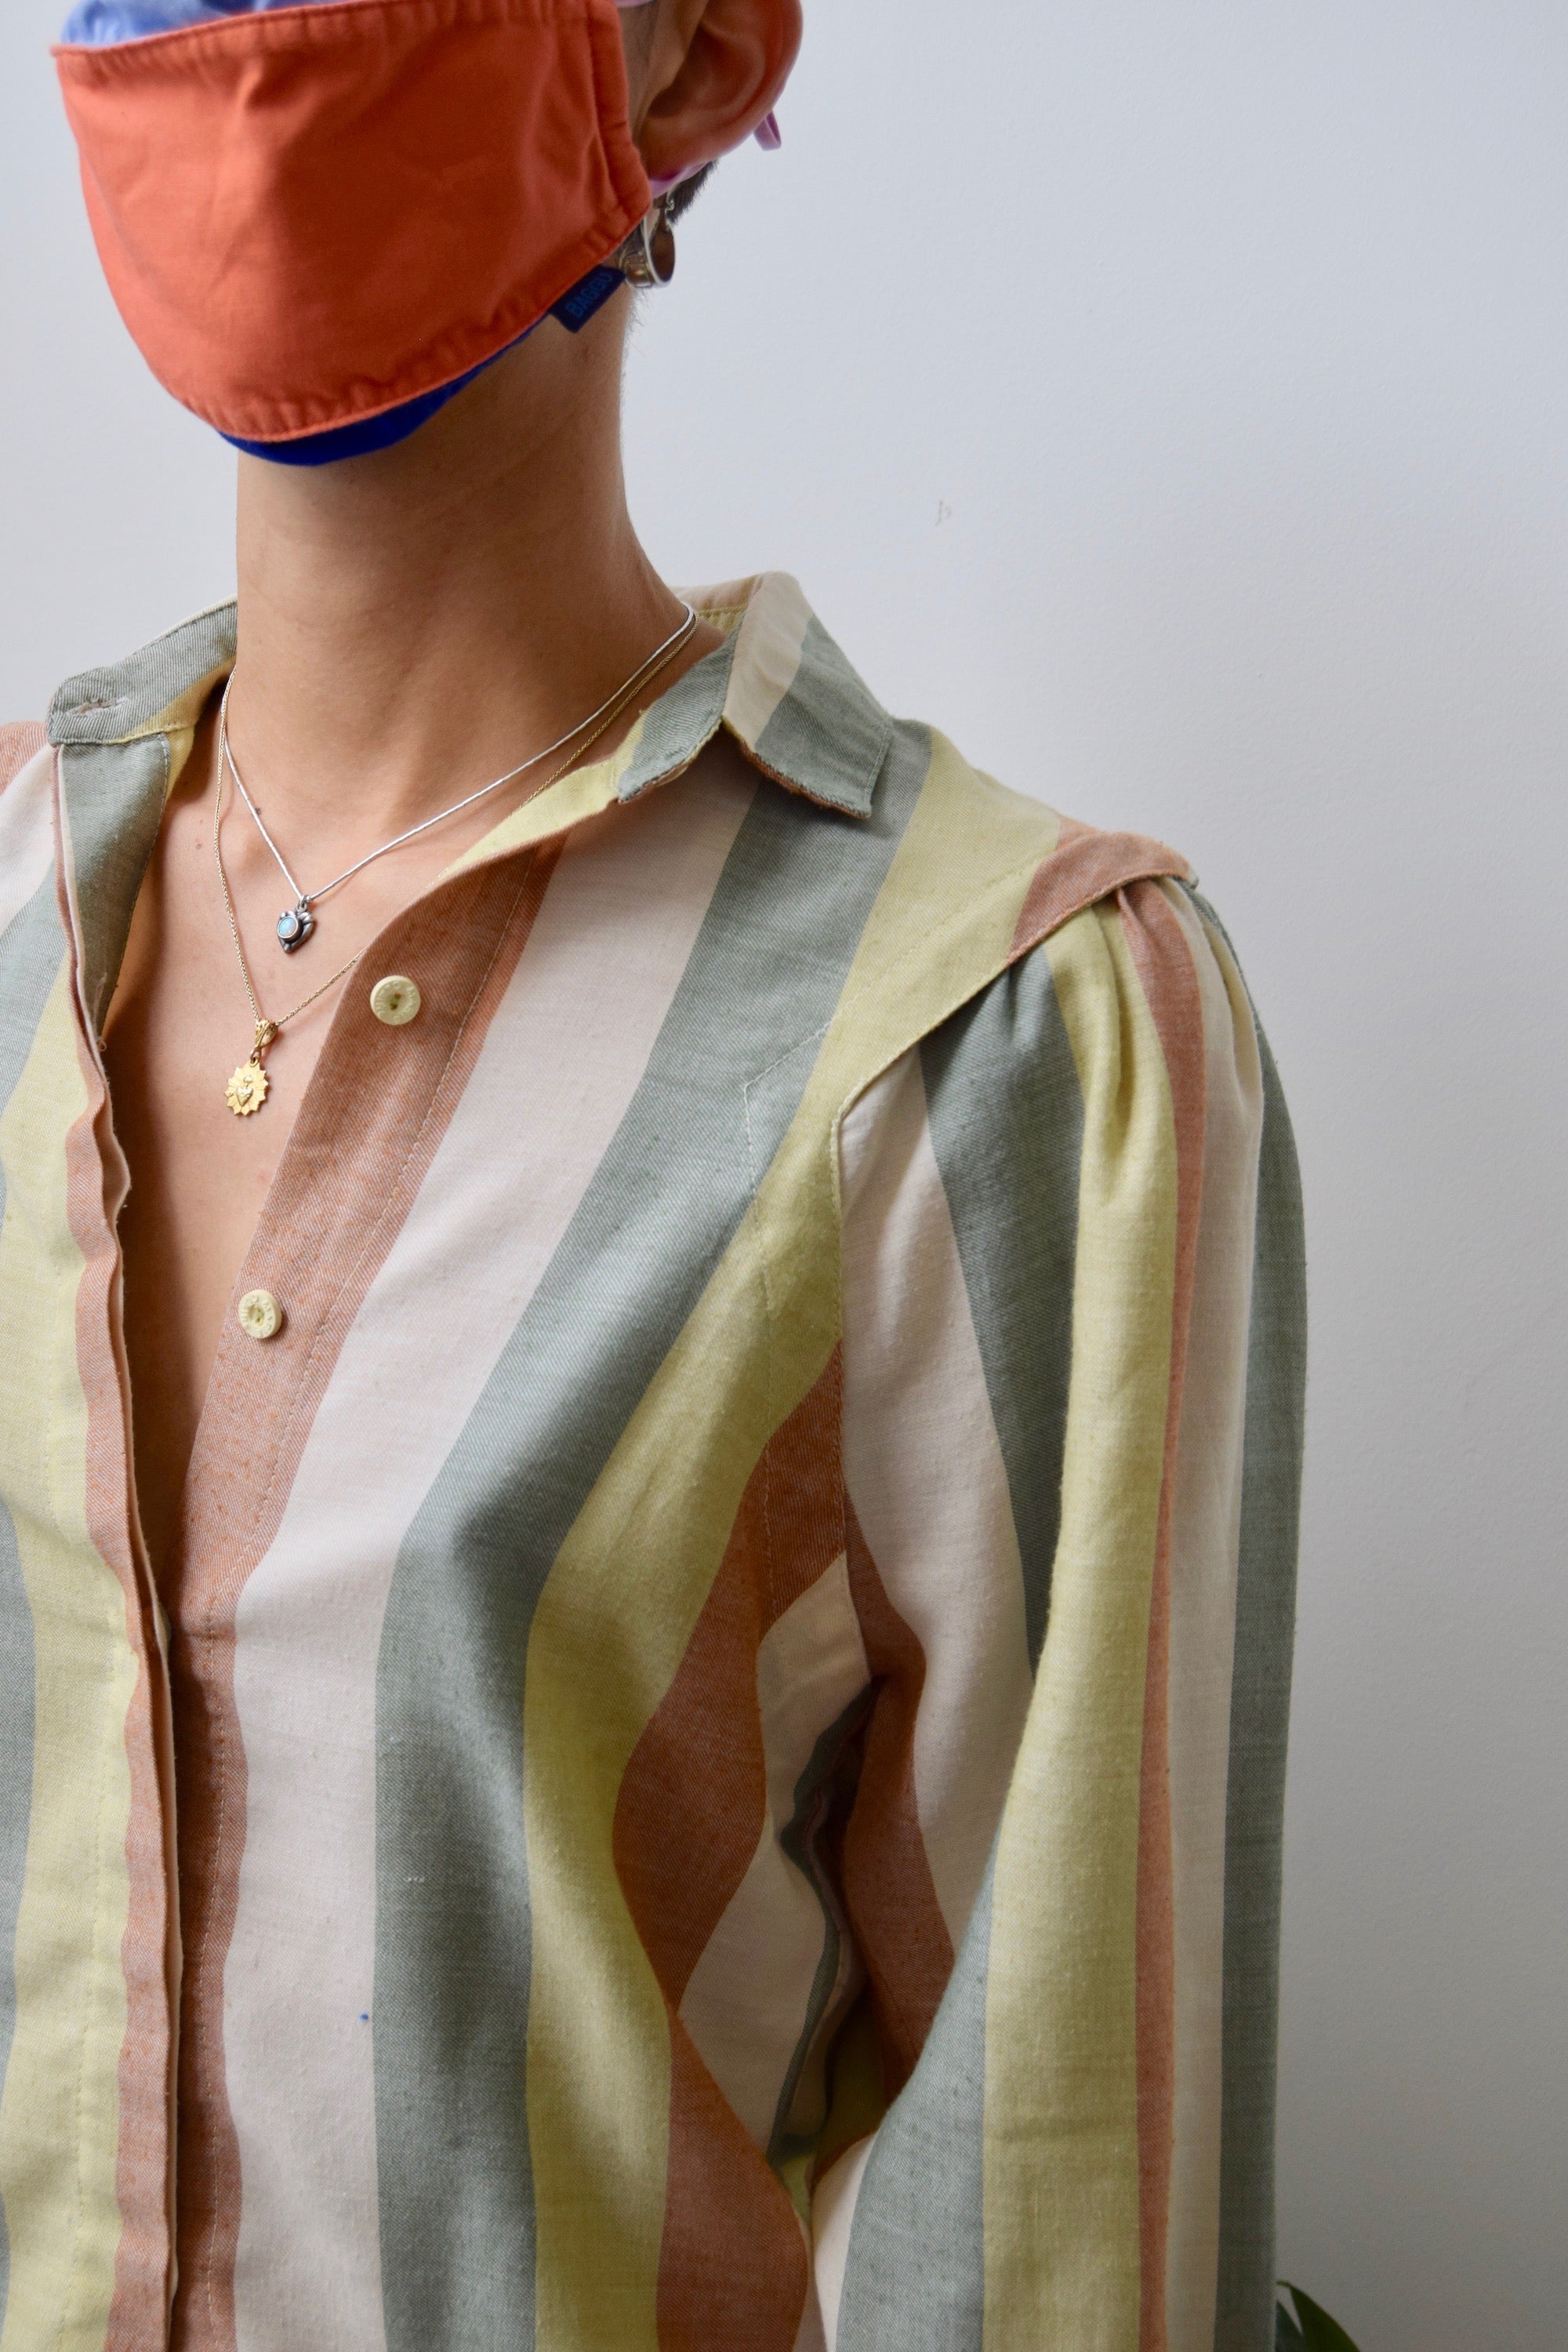 "Marie Claire" Muted Striped Blouse